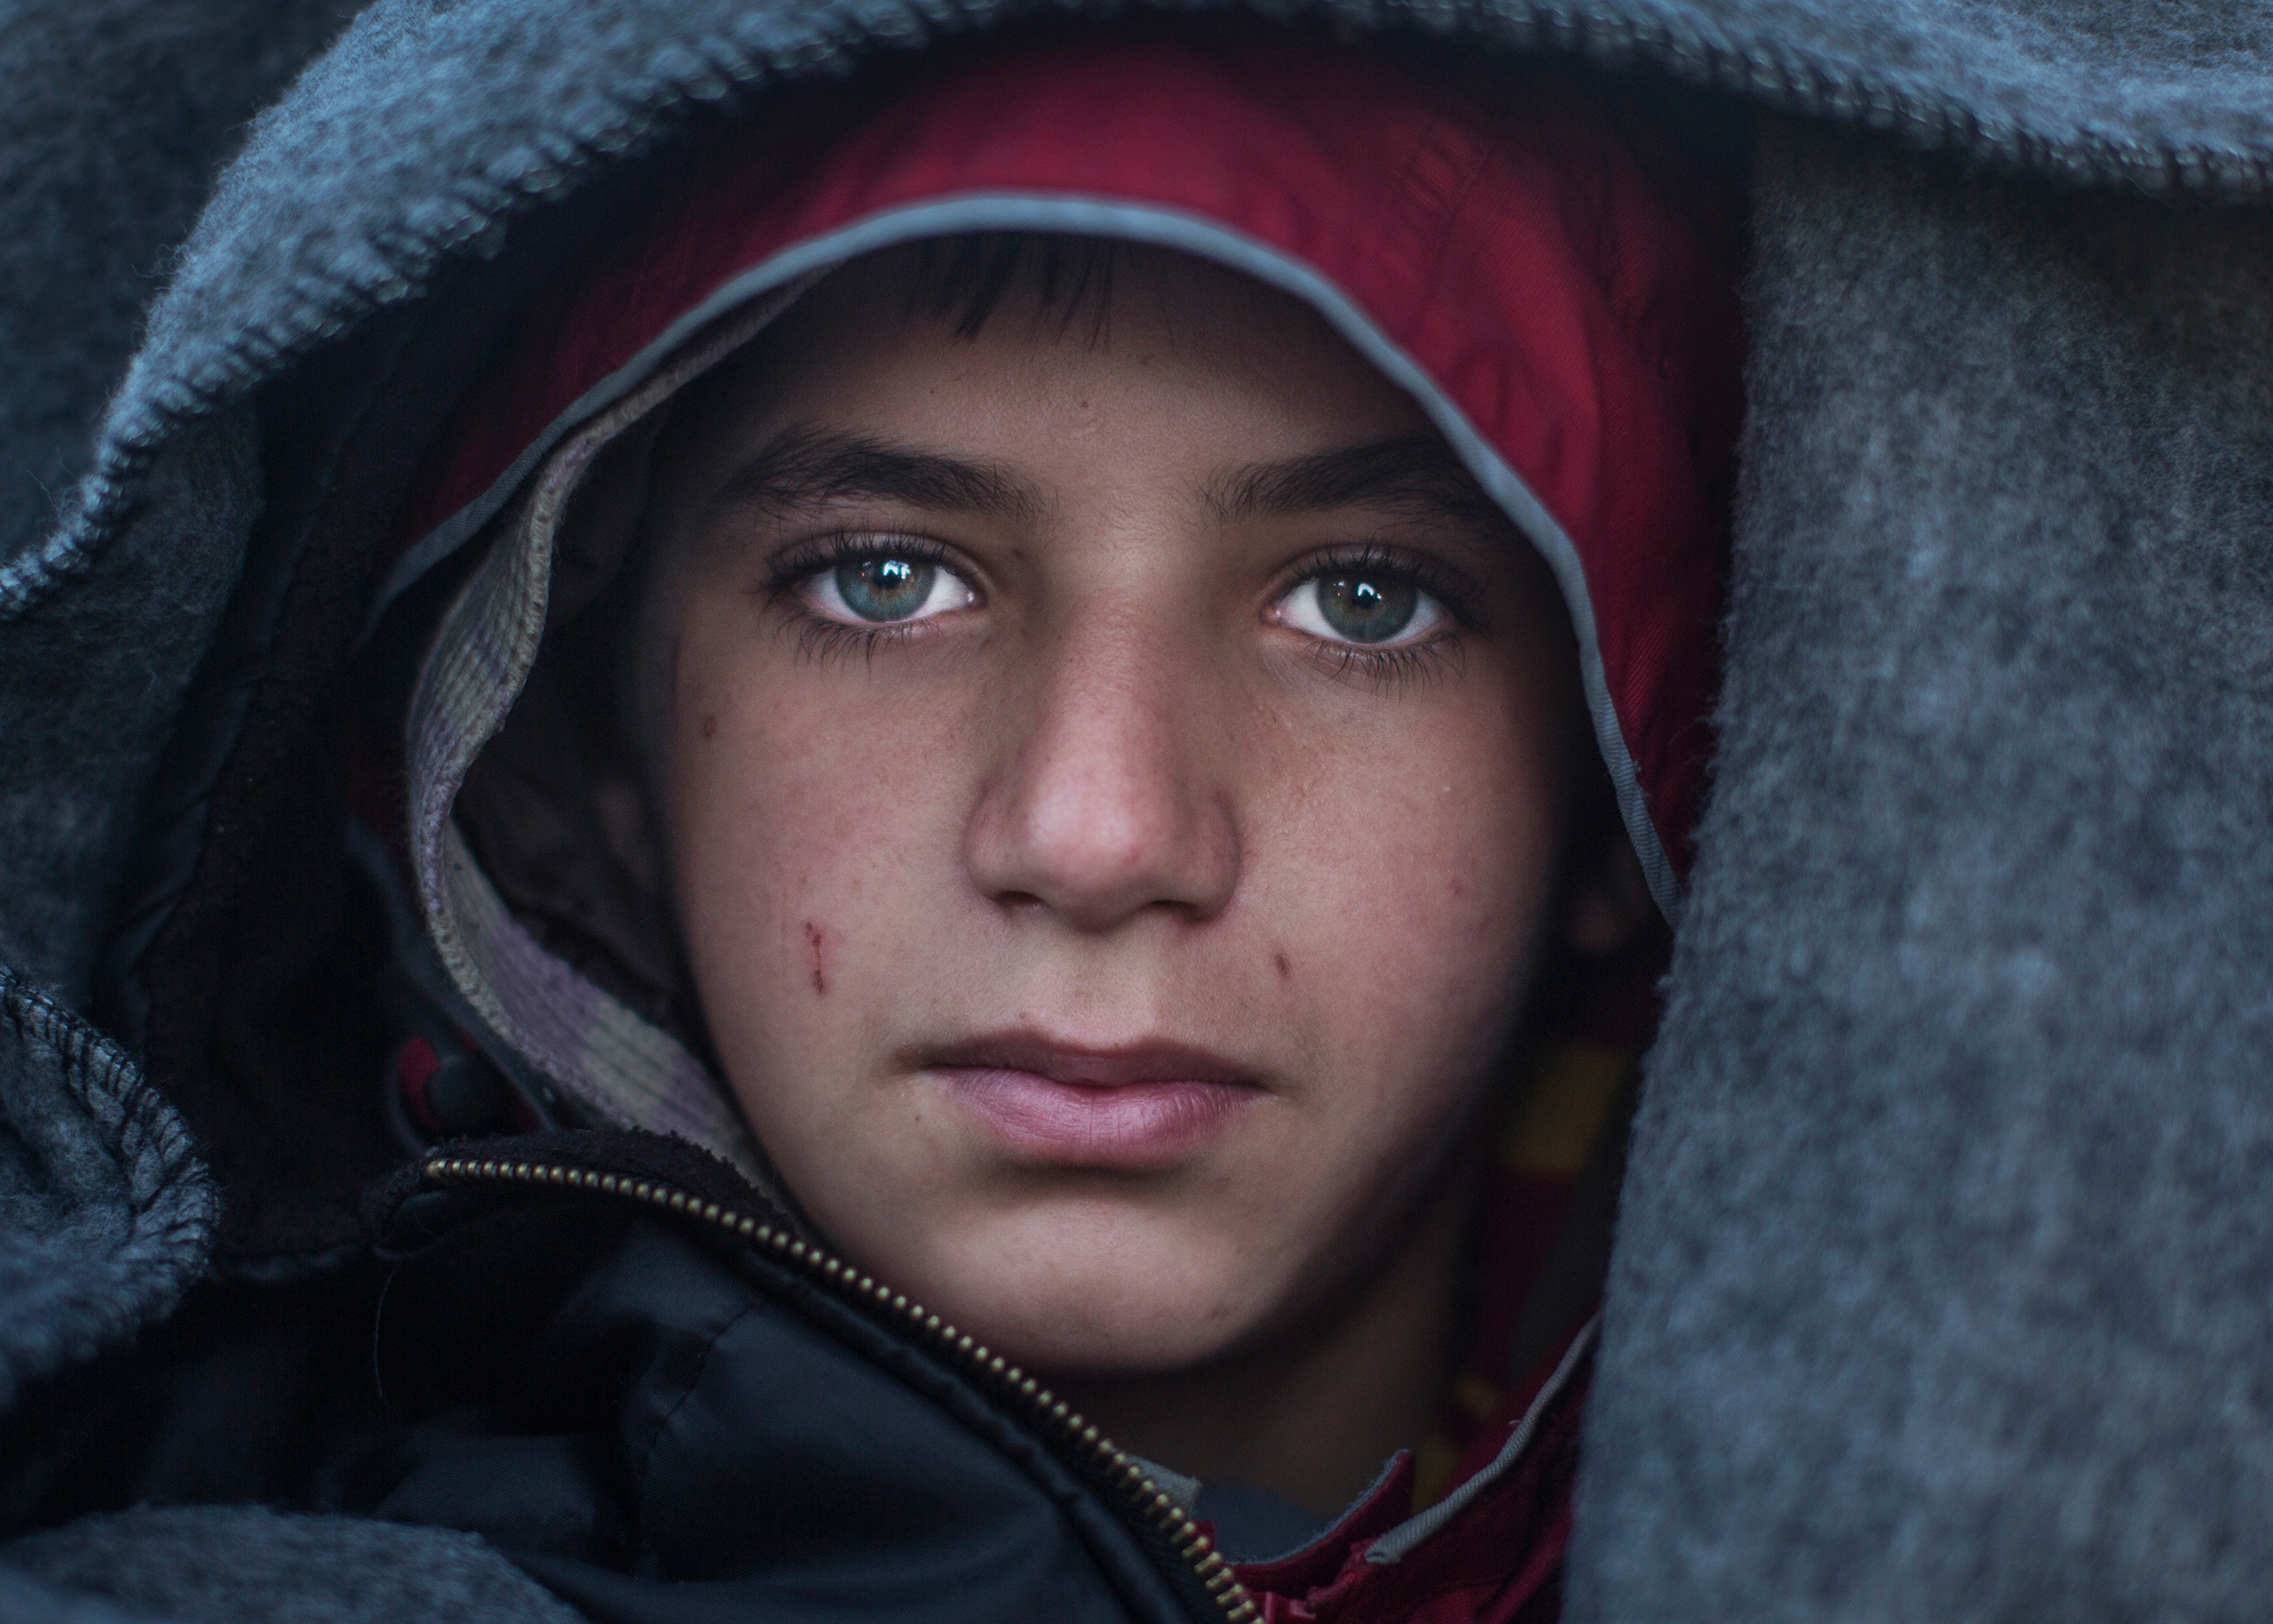 An 11-year-old Syrian refugee named Ahmed waits in line for a map directing asylum-seekers north at an encampment near the Greek village of Idomeni, March 4, 2016. (Ali Ali)